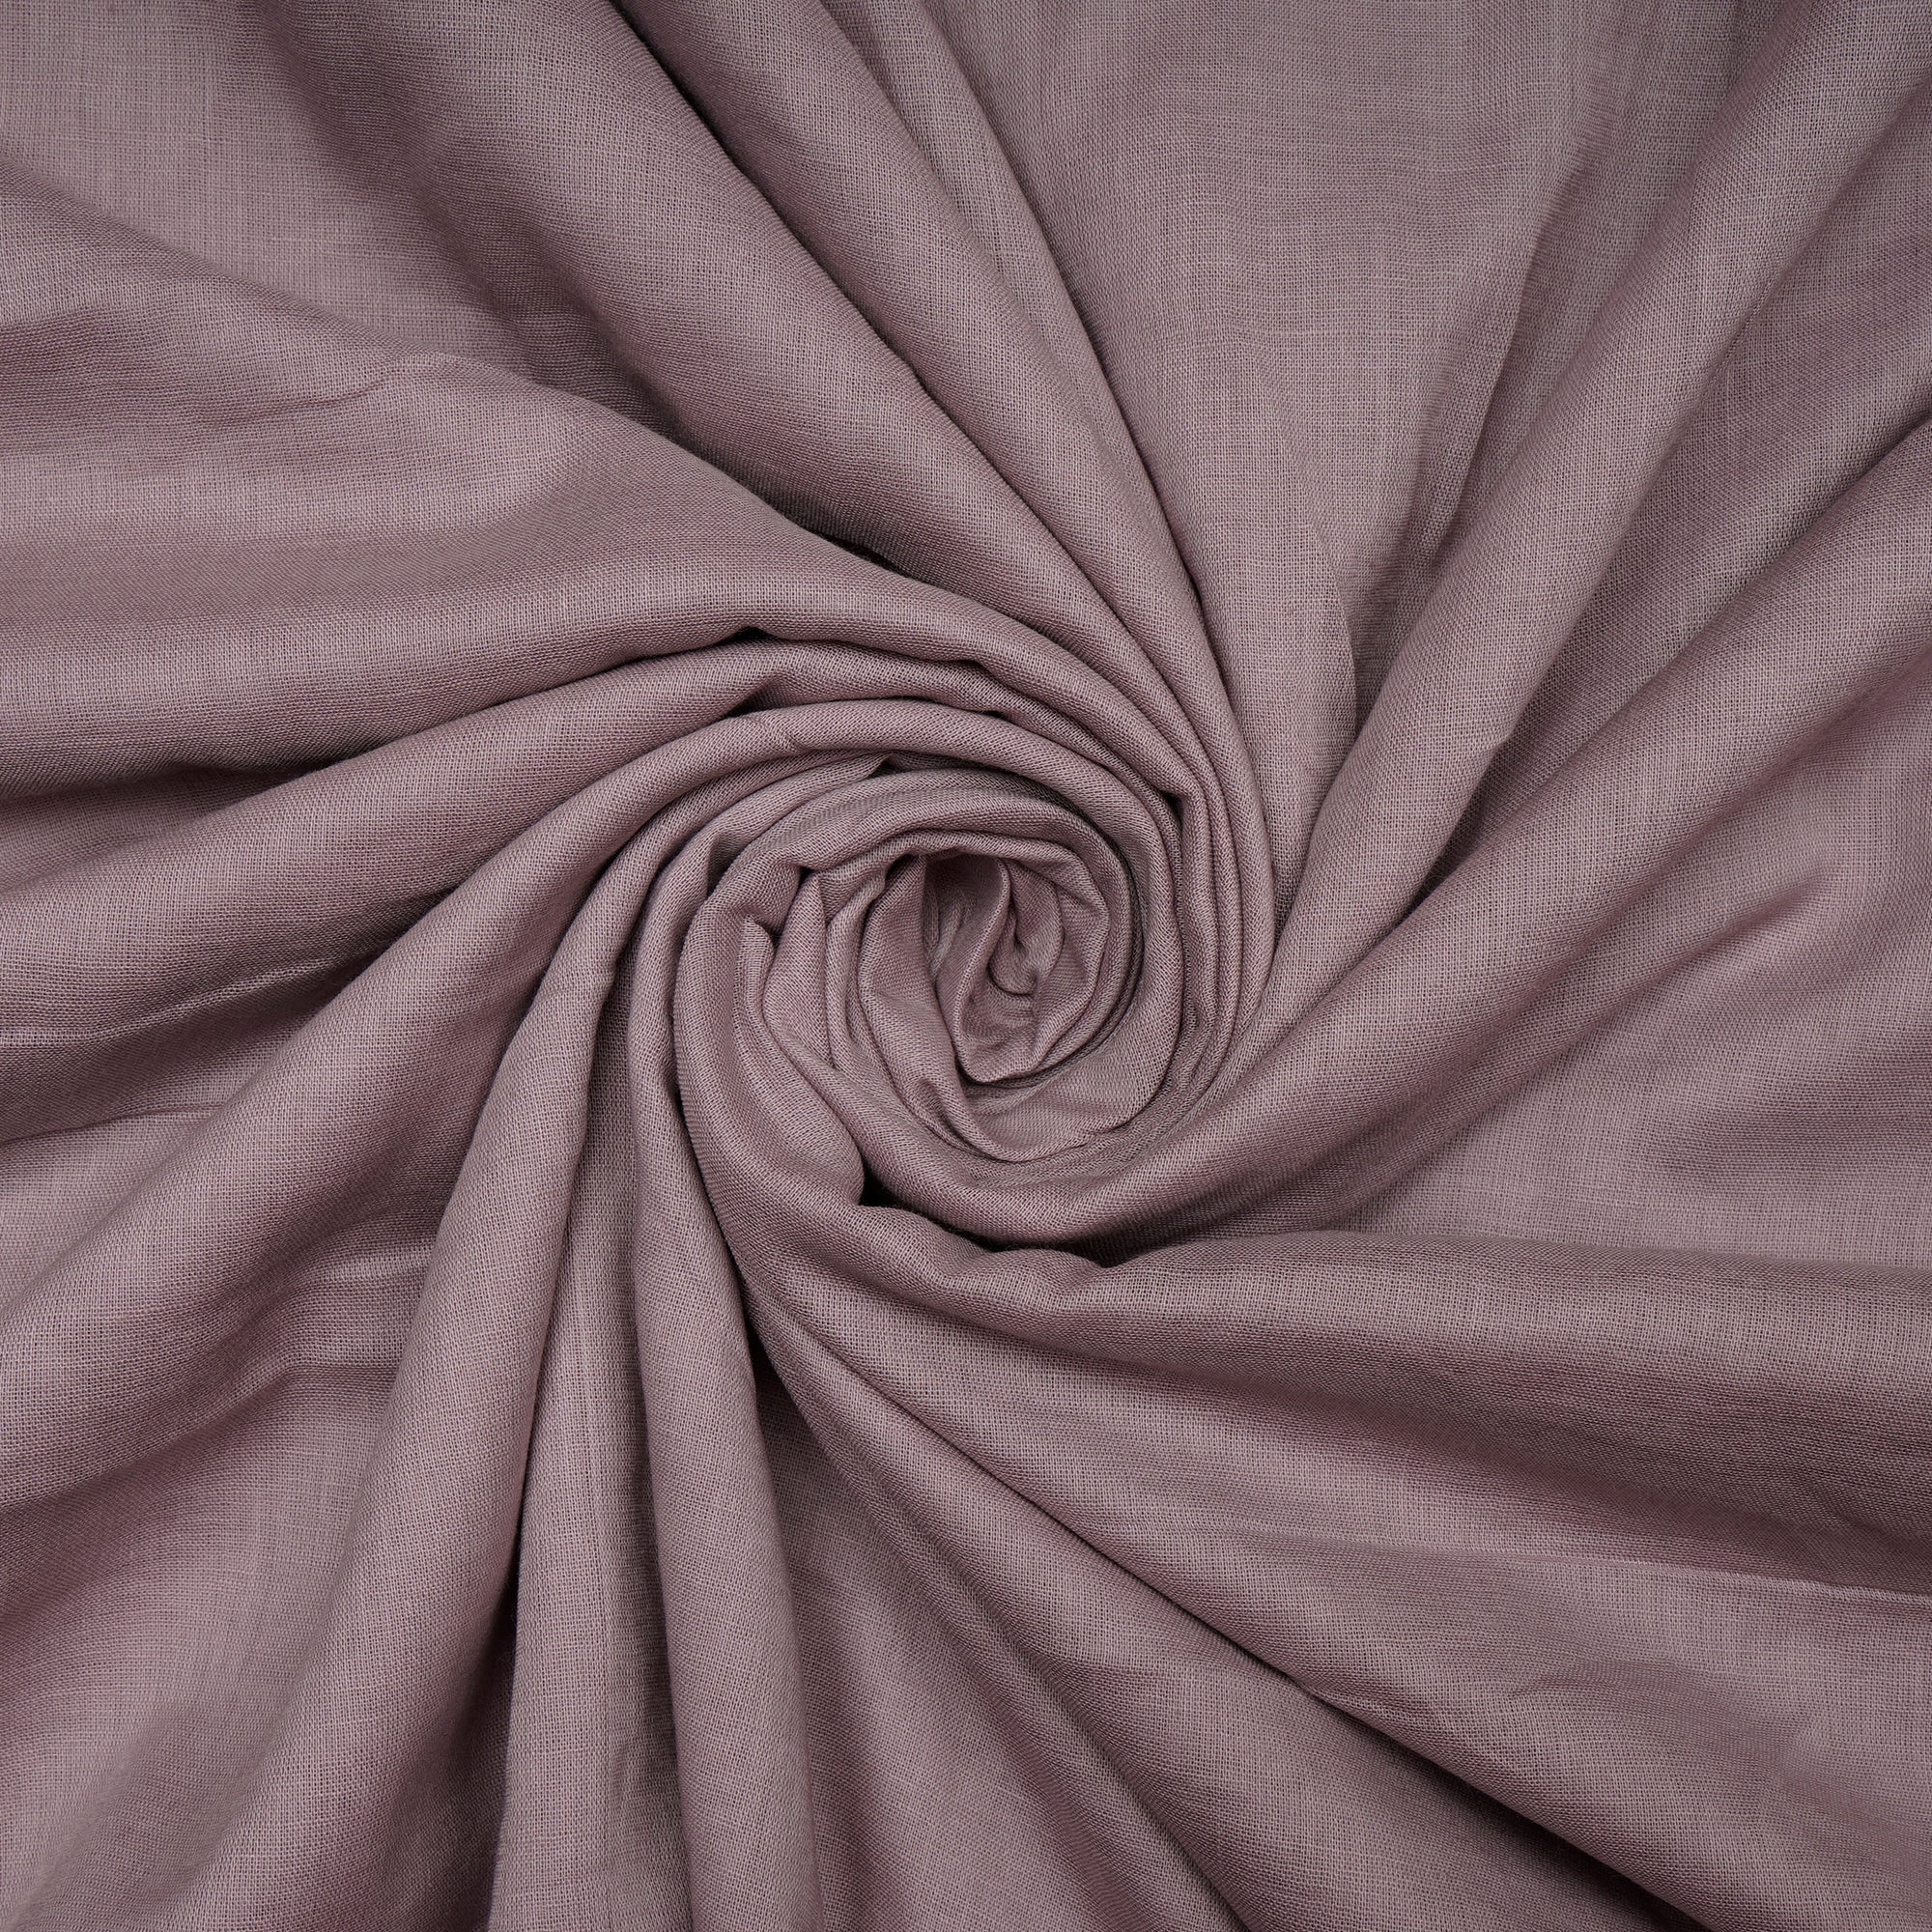 Gray LilacPiece Dyed Cotton Voile Fabric